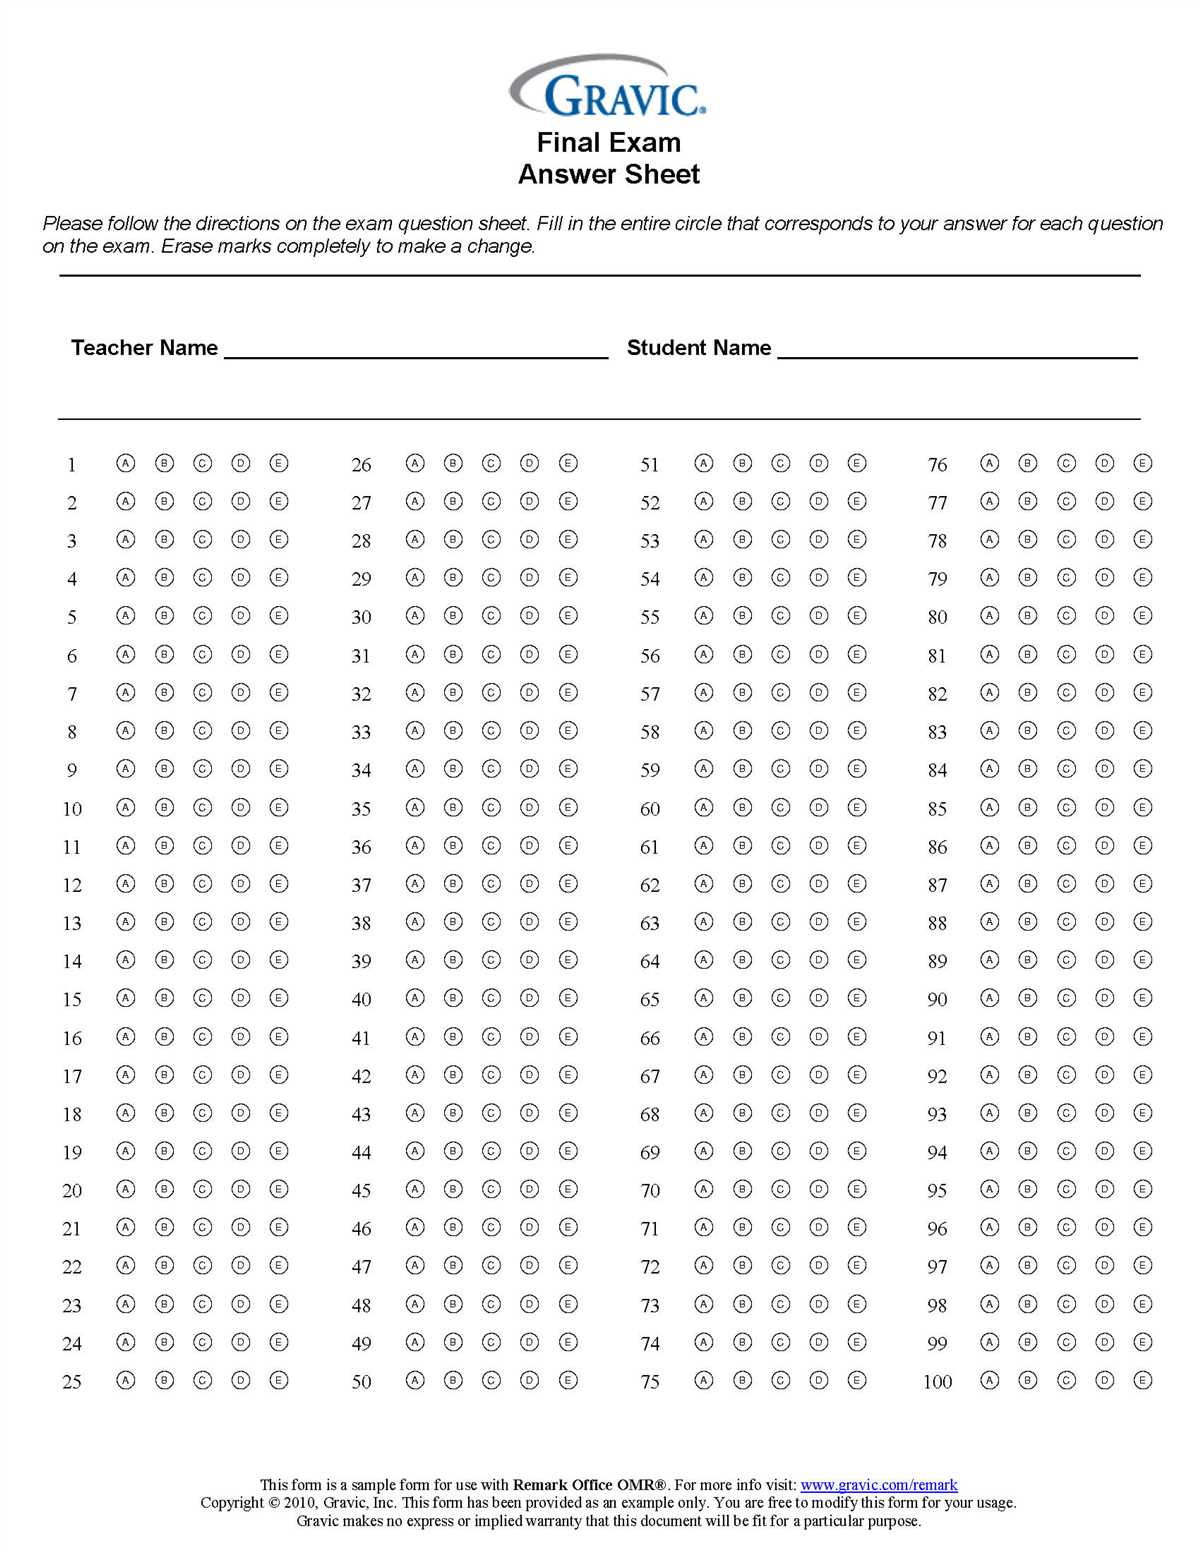 AHA BLS Test Answer Sheet: Tips and Tricks for Success